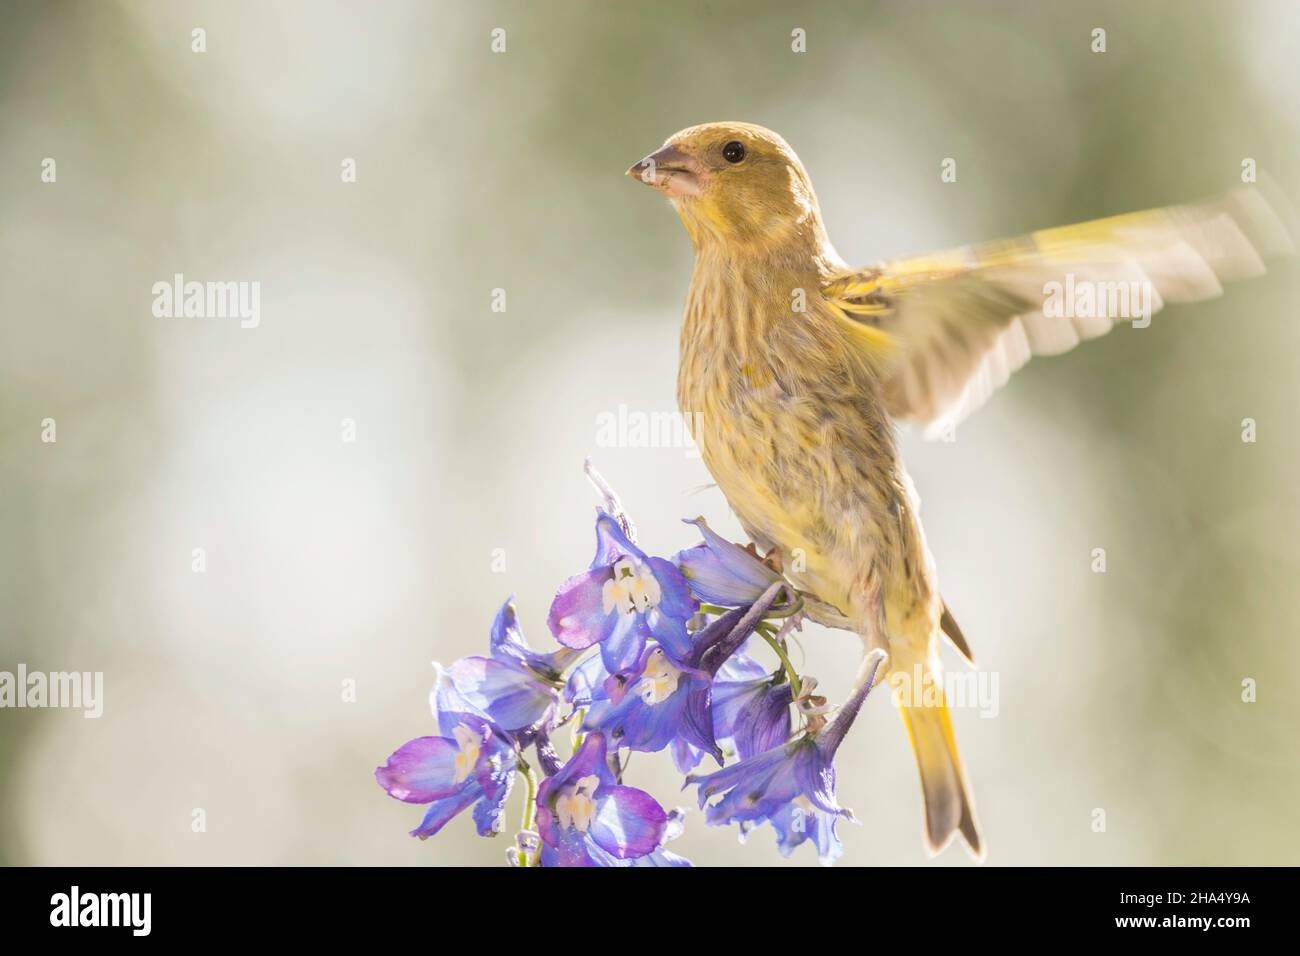 close up of a of greenfinch on flowers with blurry spread wings Stock Photo